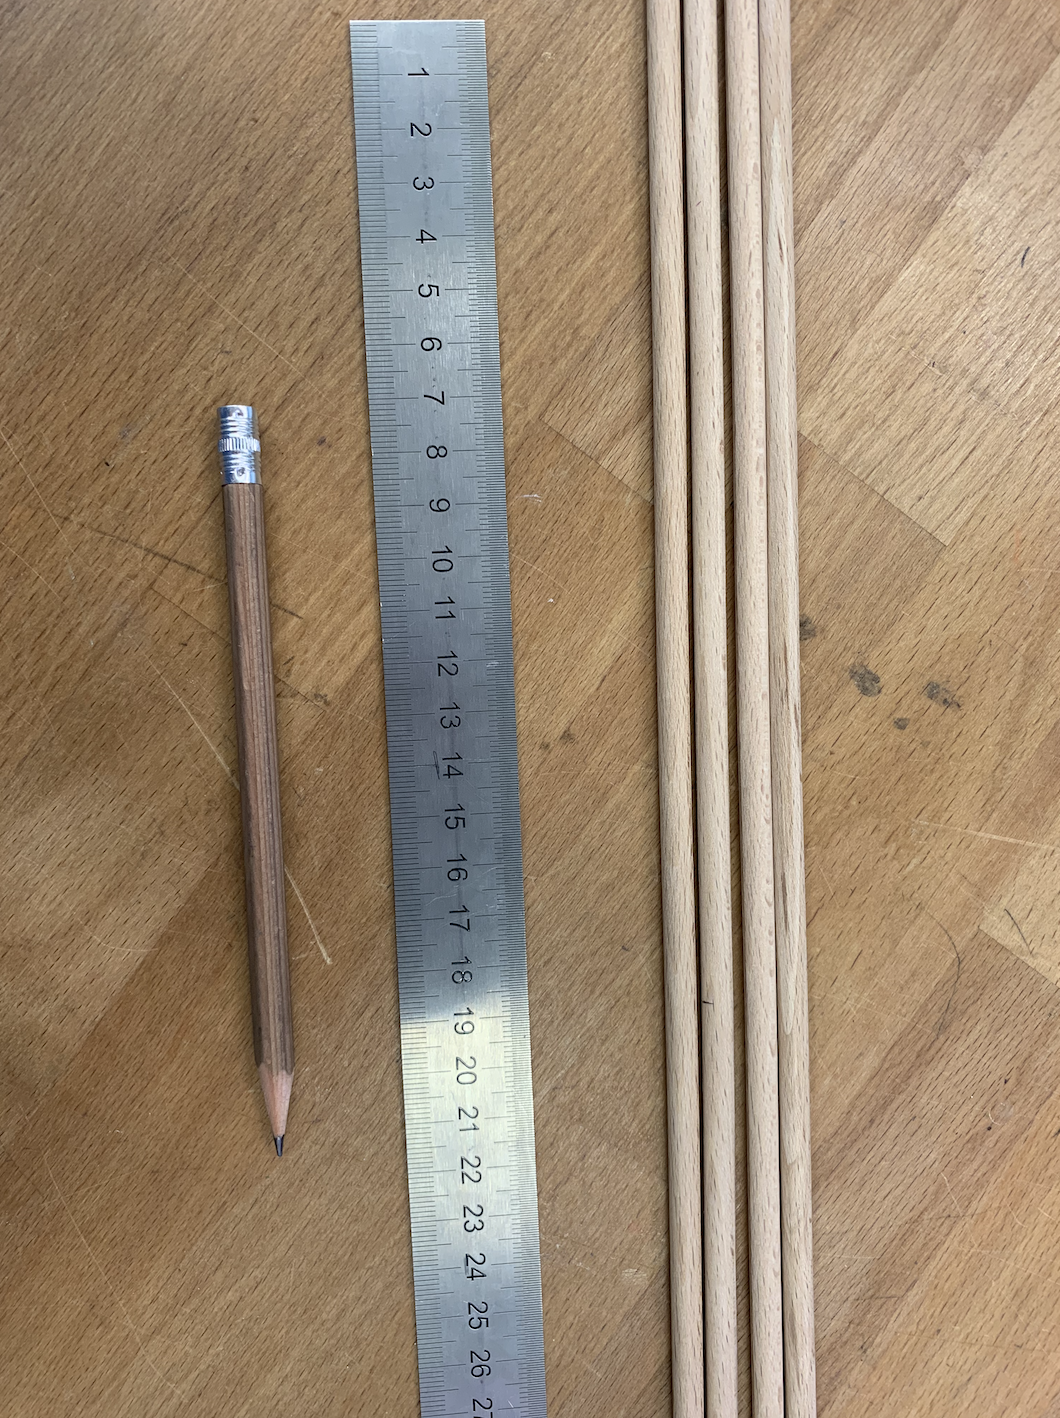 Pencil, Wooden Skewers, and Ruler.png